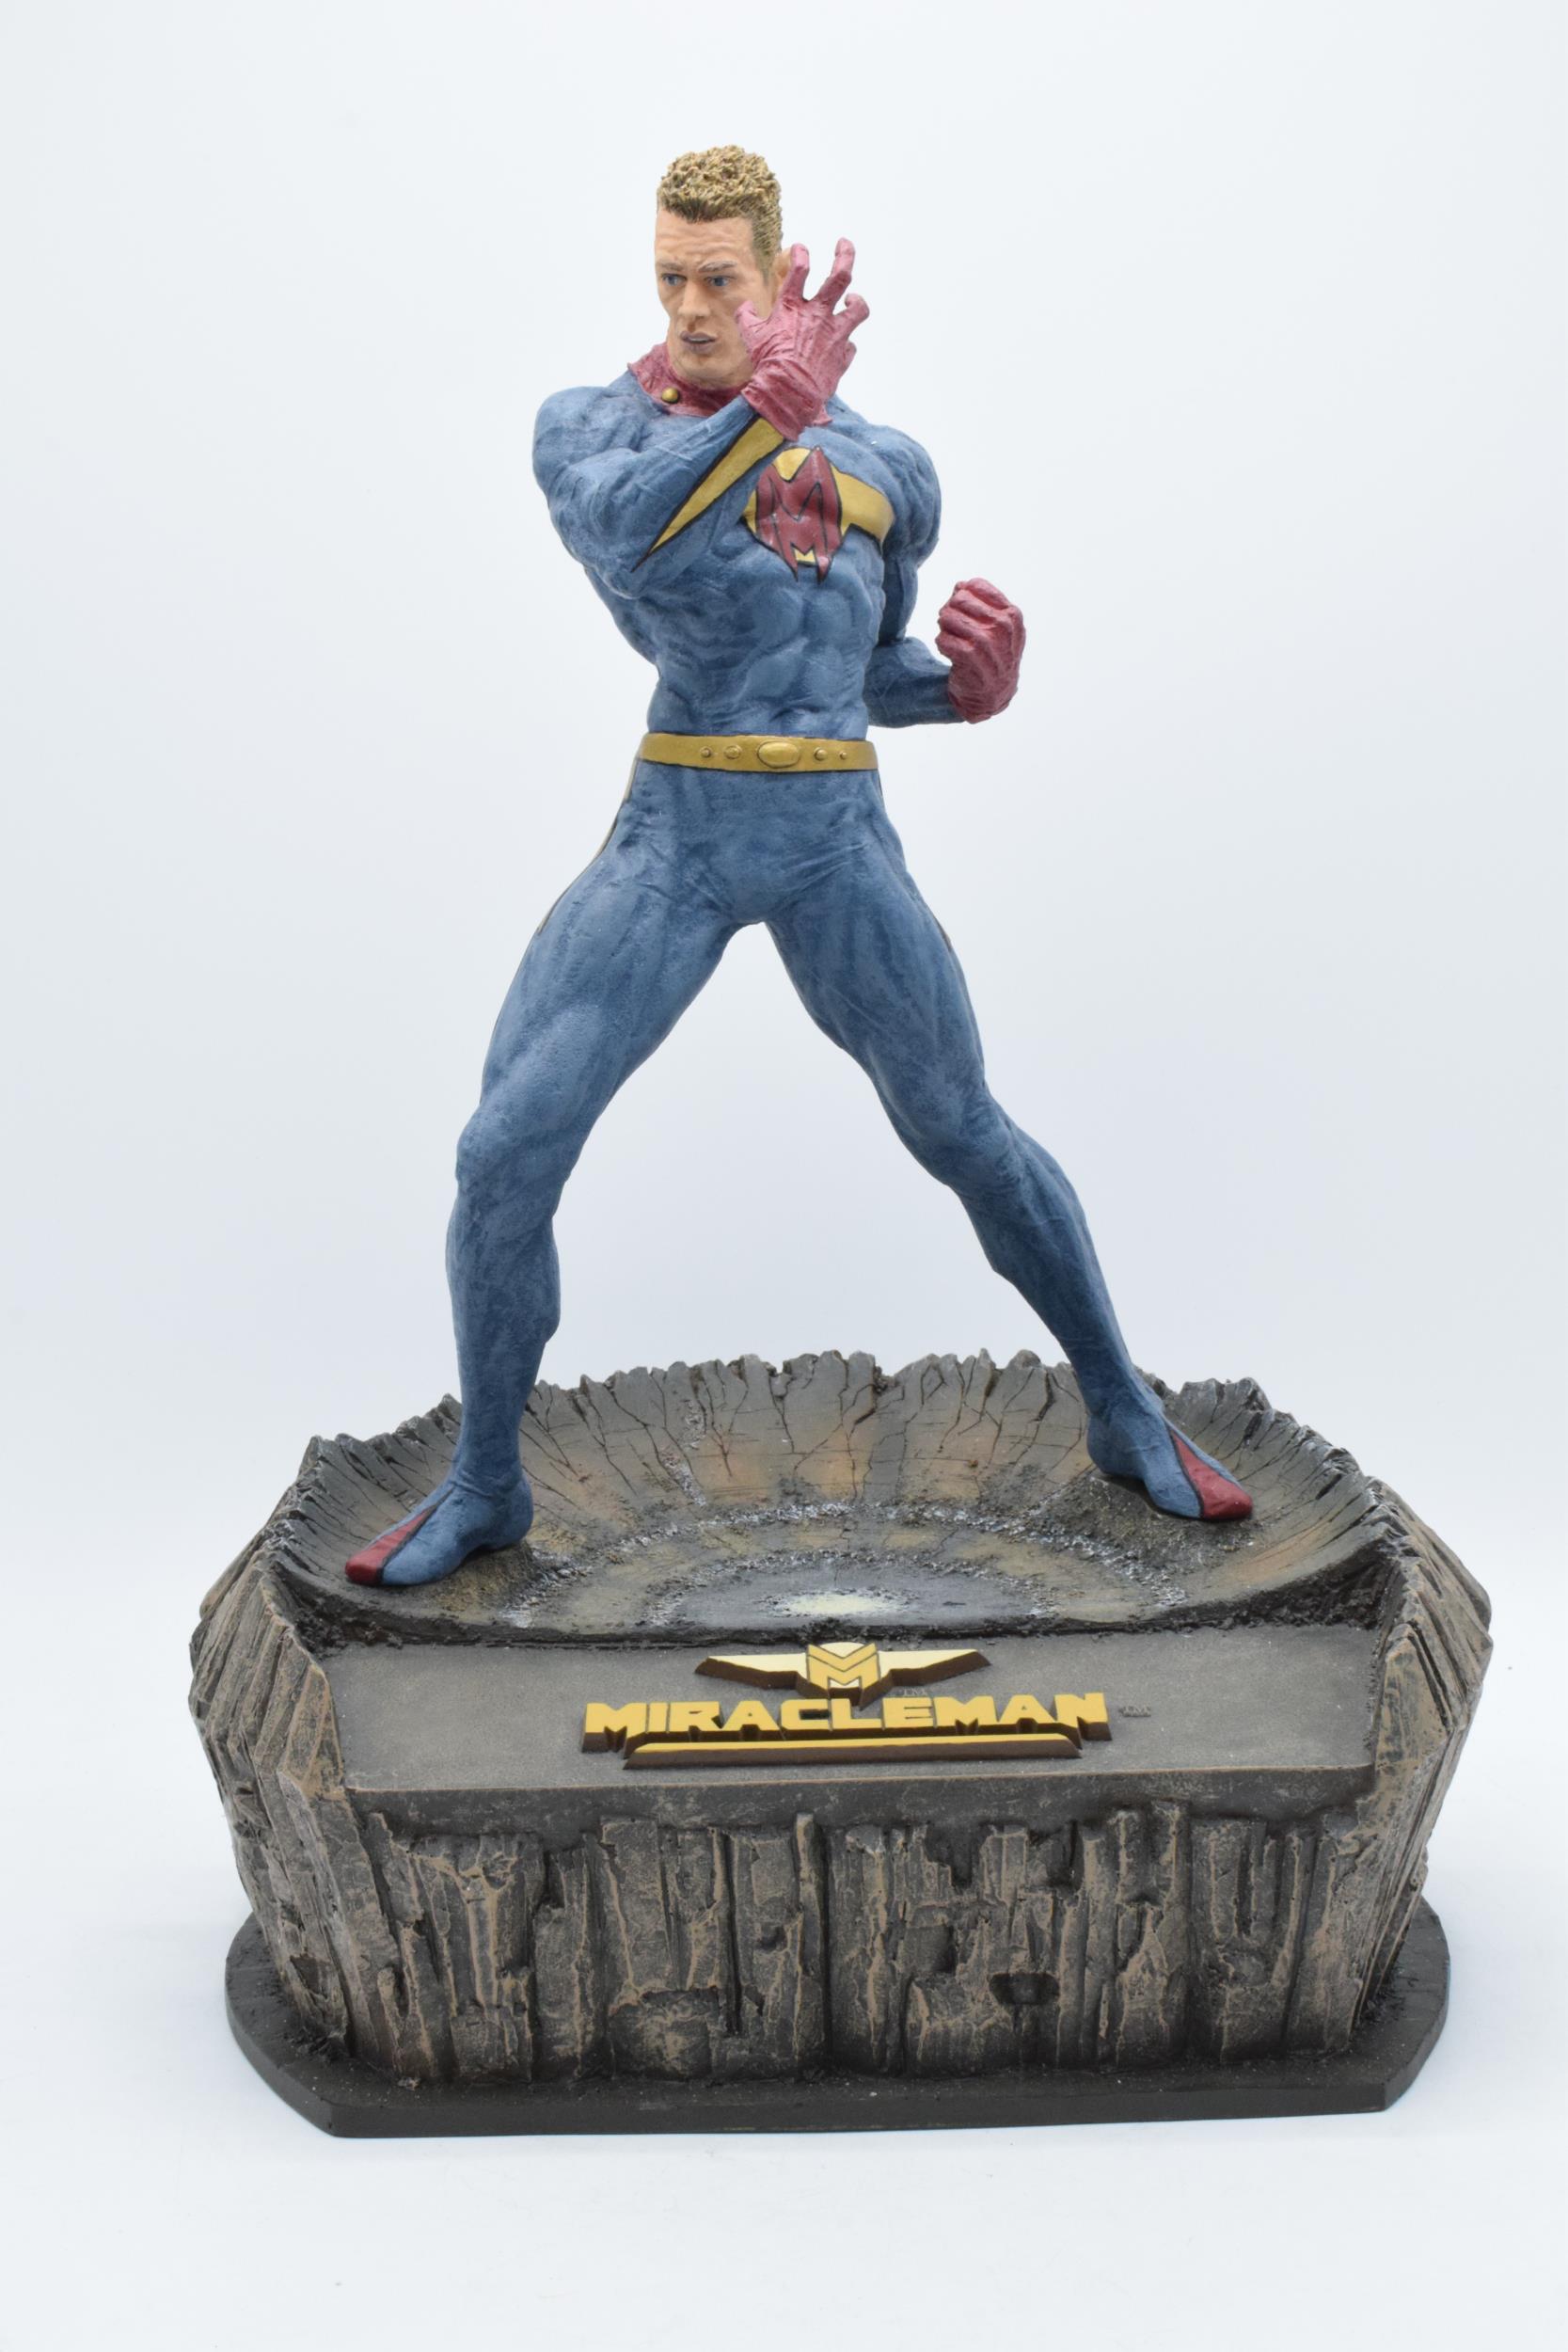 Boxed Miracleman Extremely Limited Edition Cold Cast Resin figure, 38cm tall.